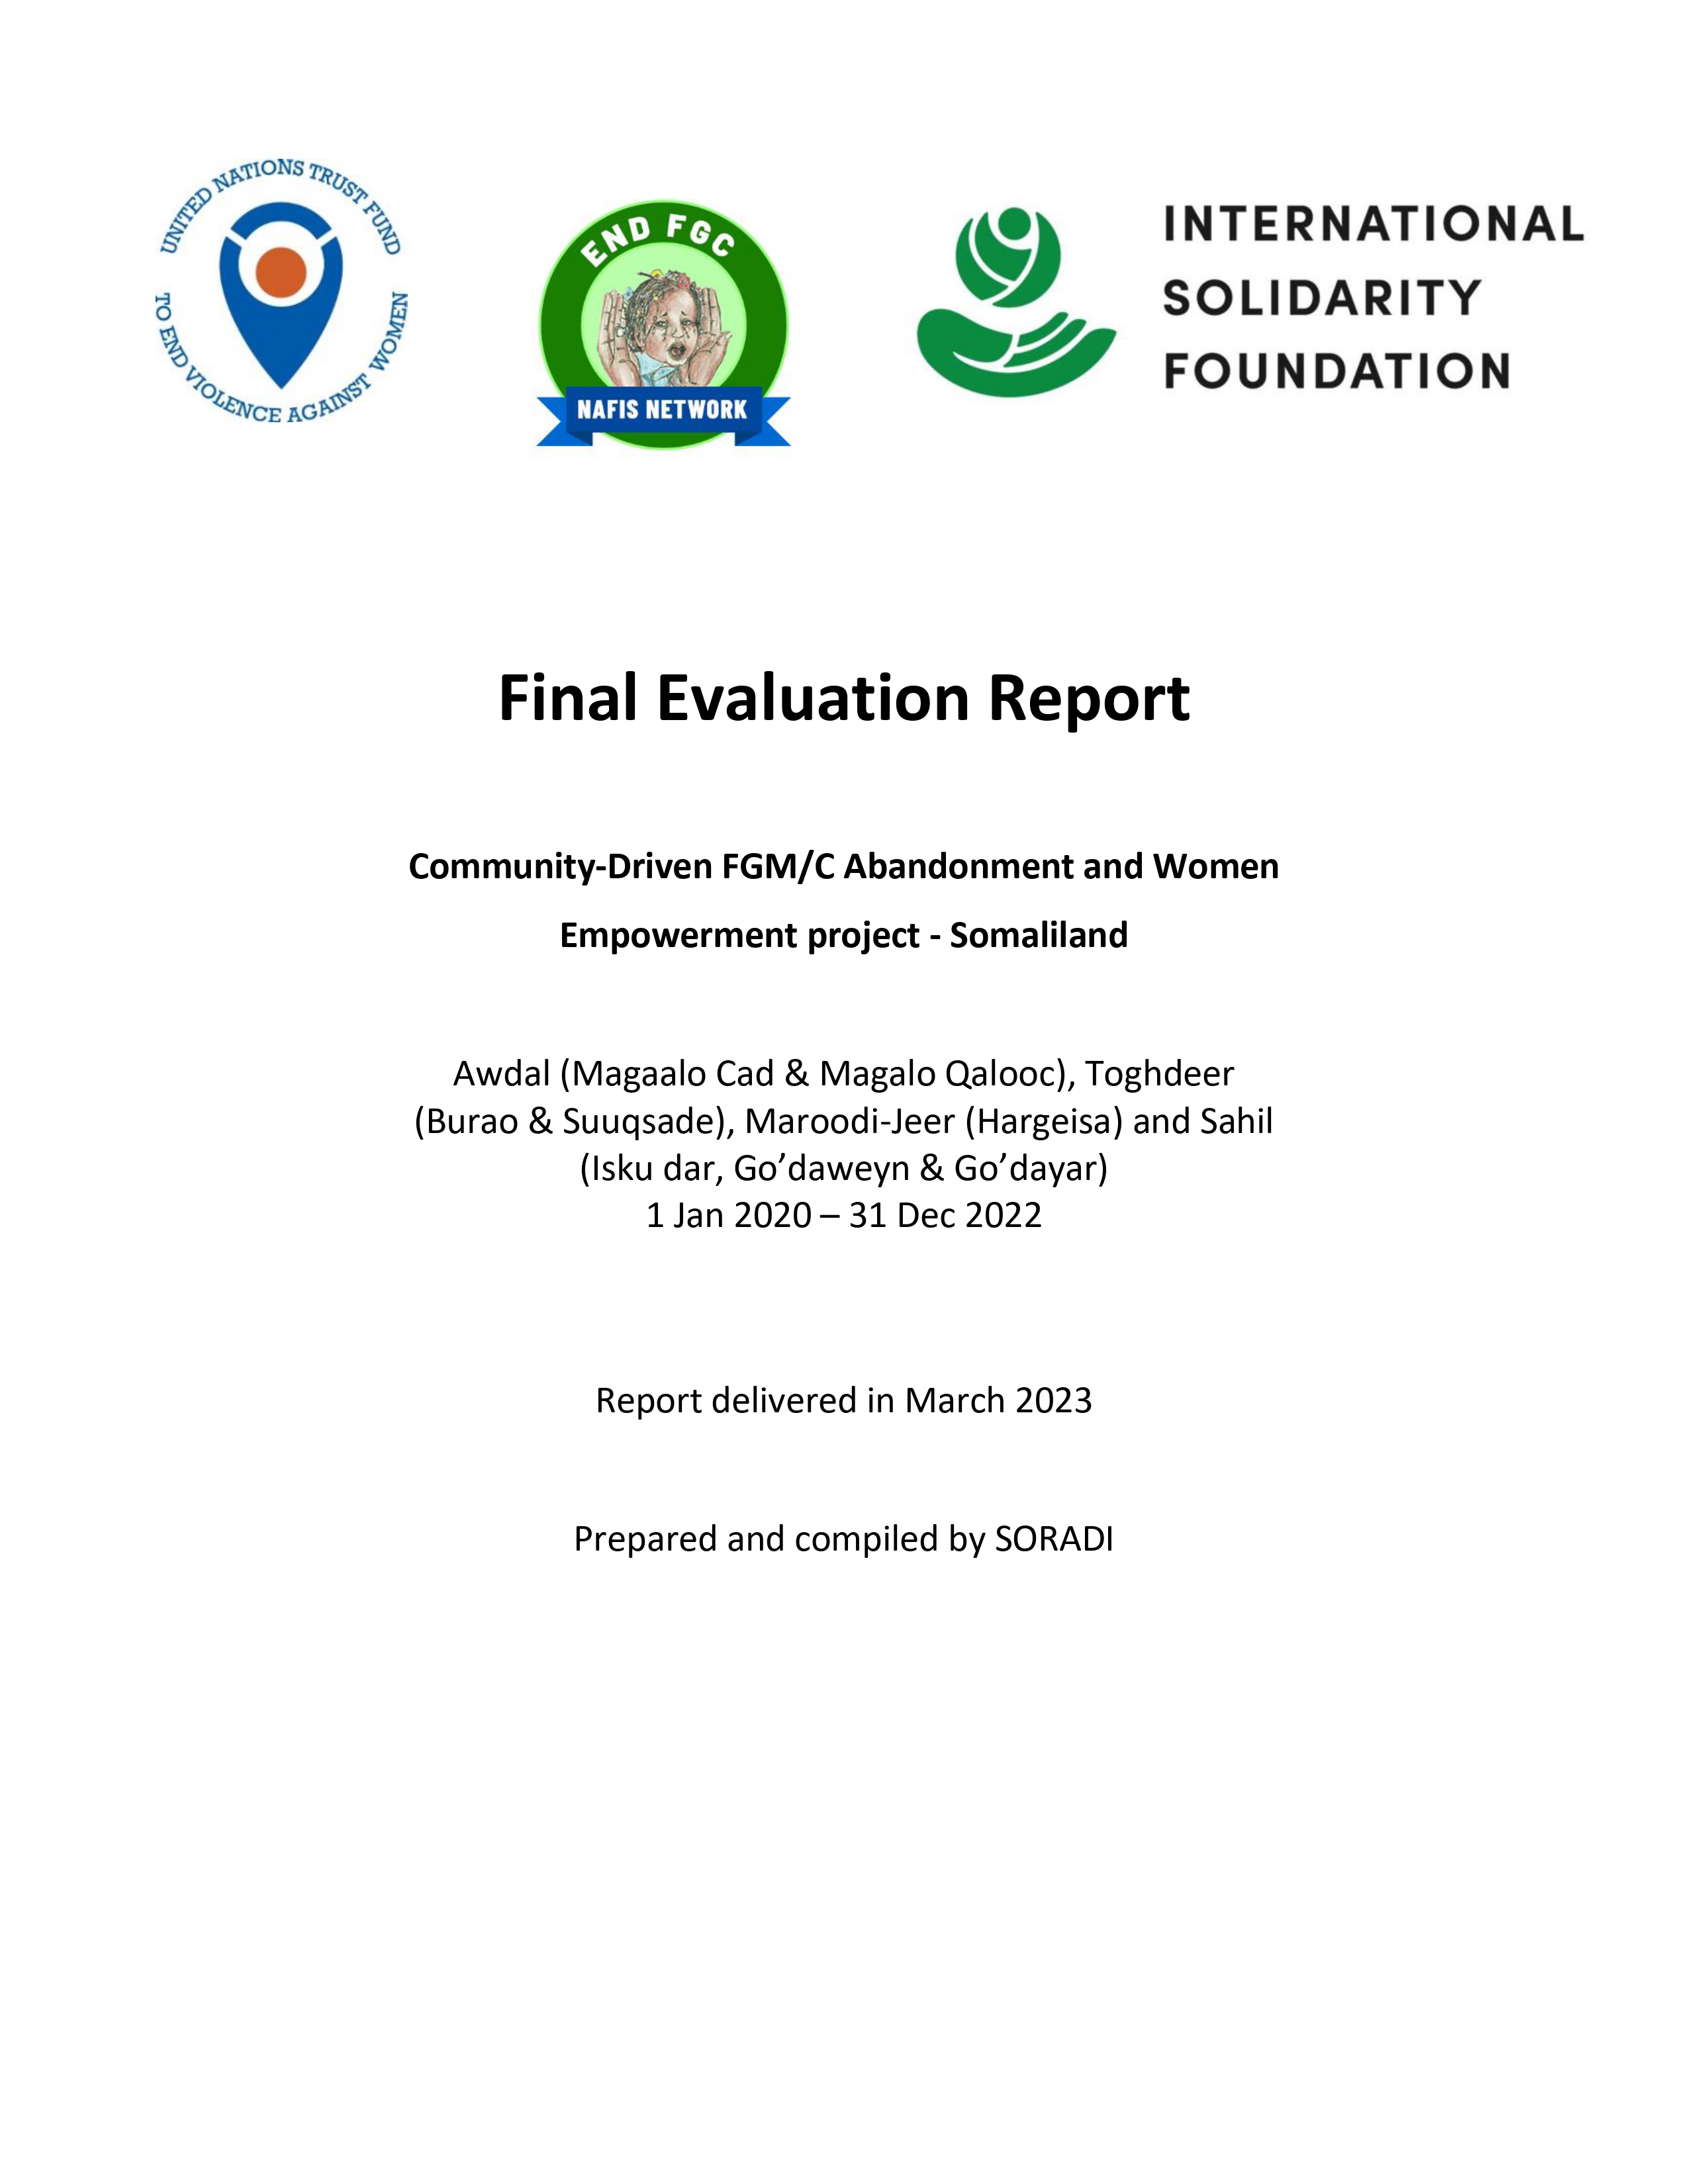 Final Evaluation: Community Driven FGM/C Abandonment and Women Empowerment in Somaliland